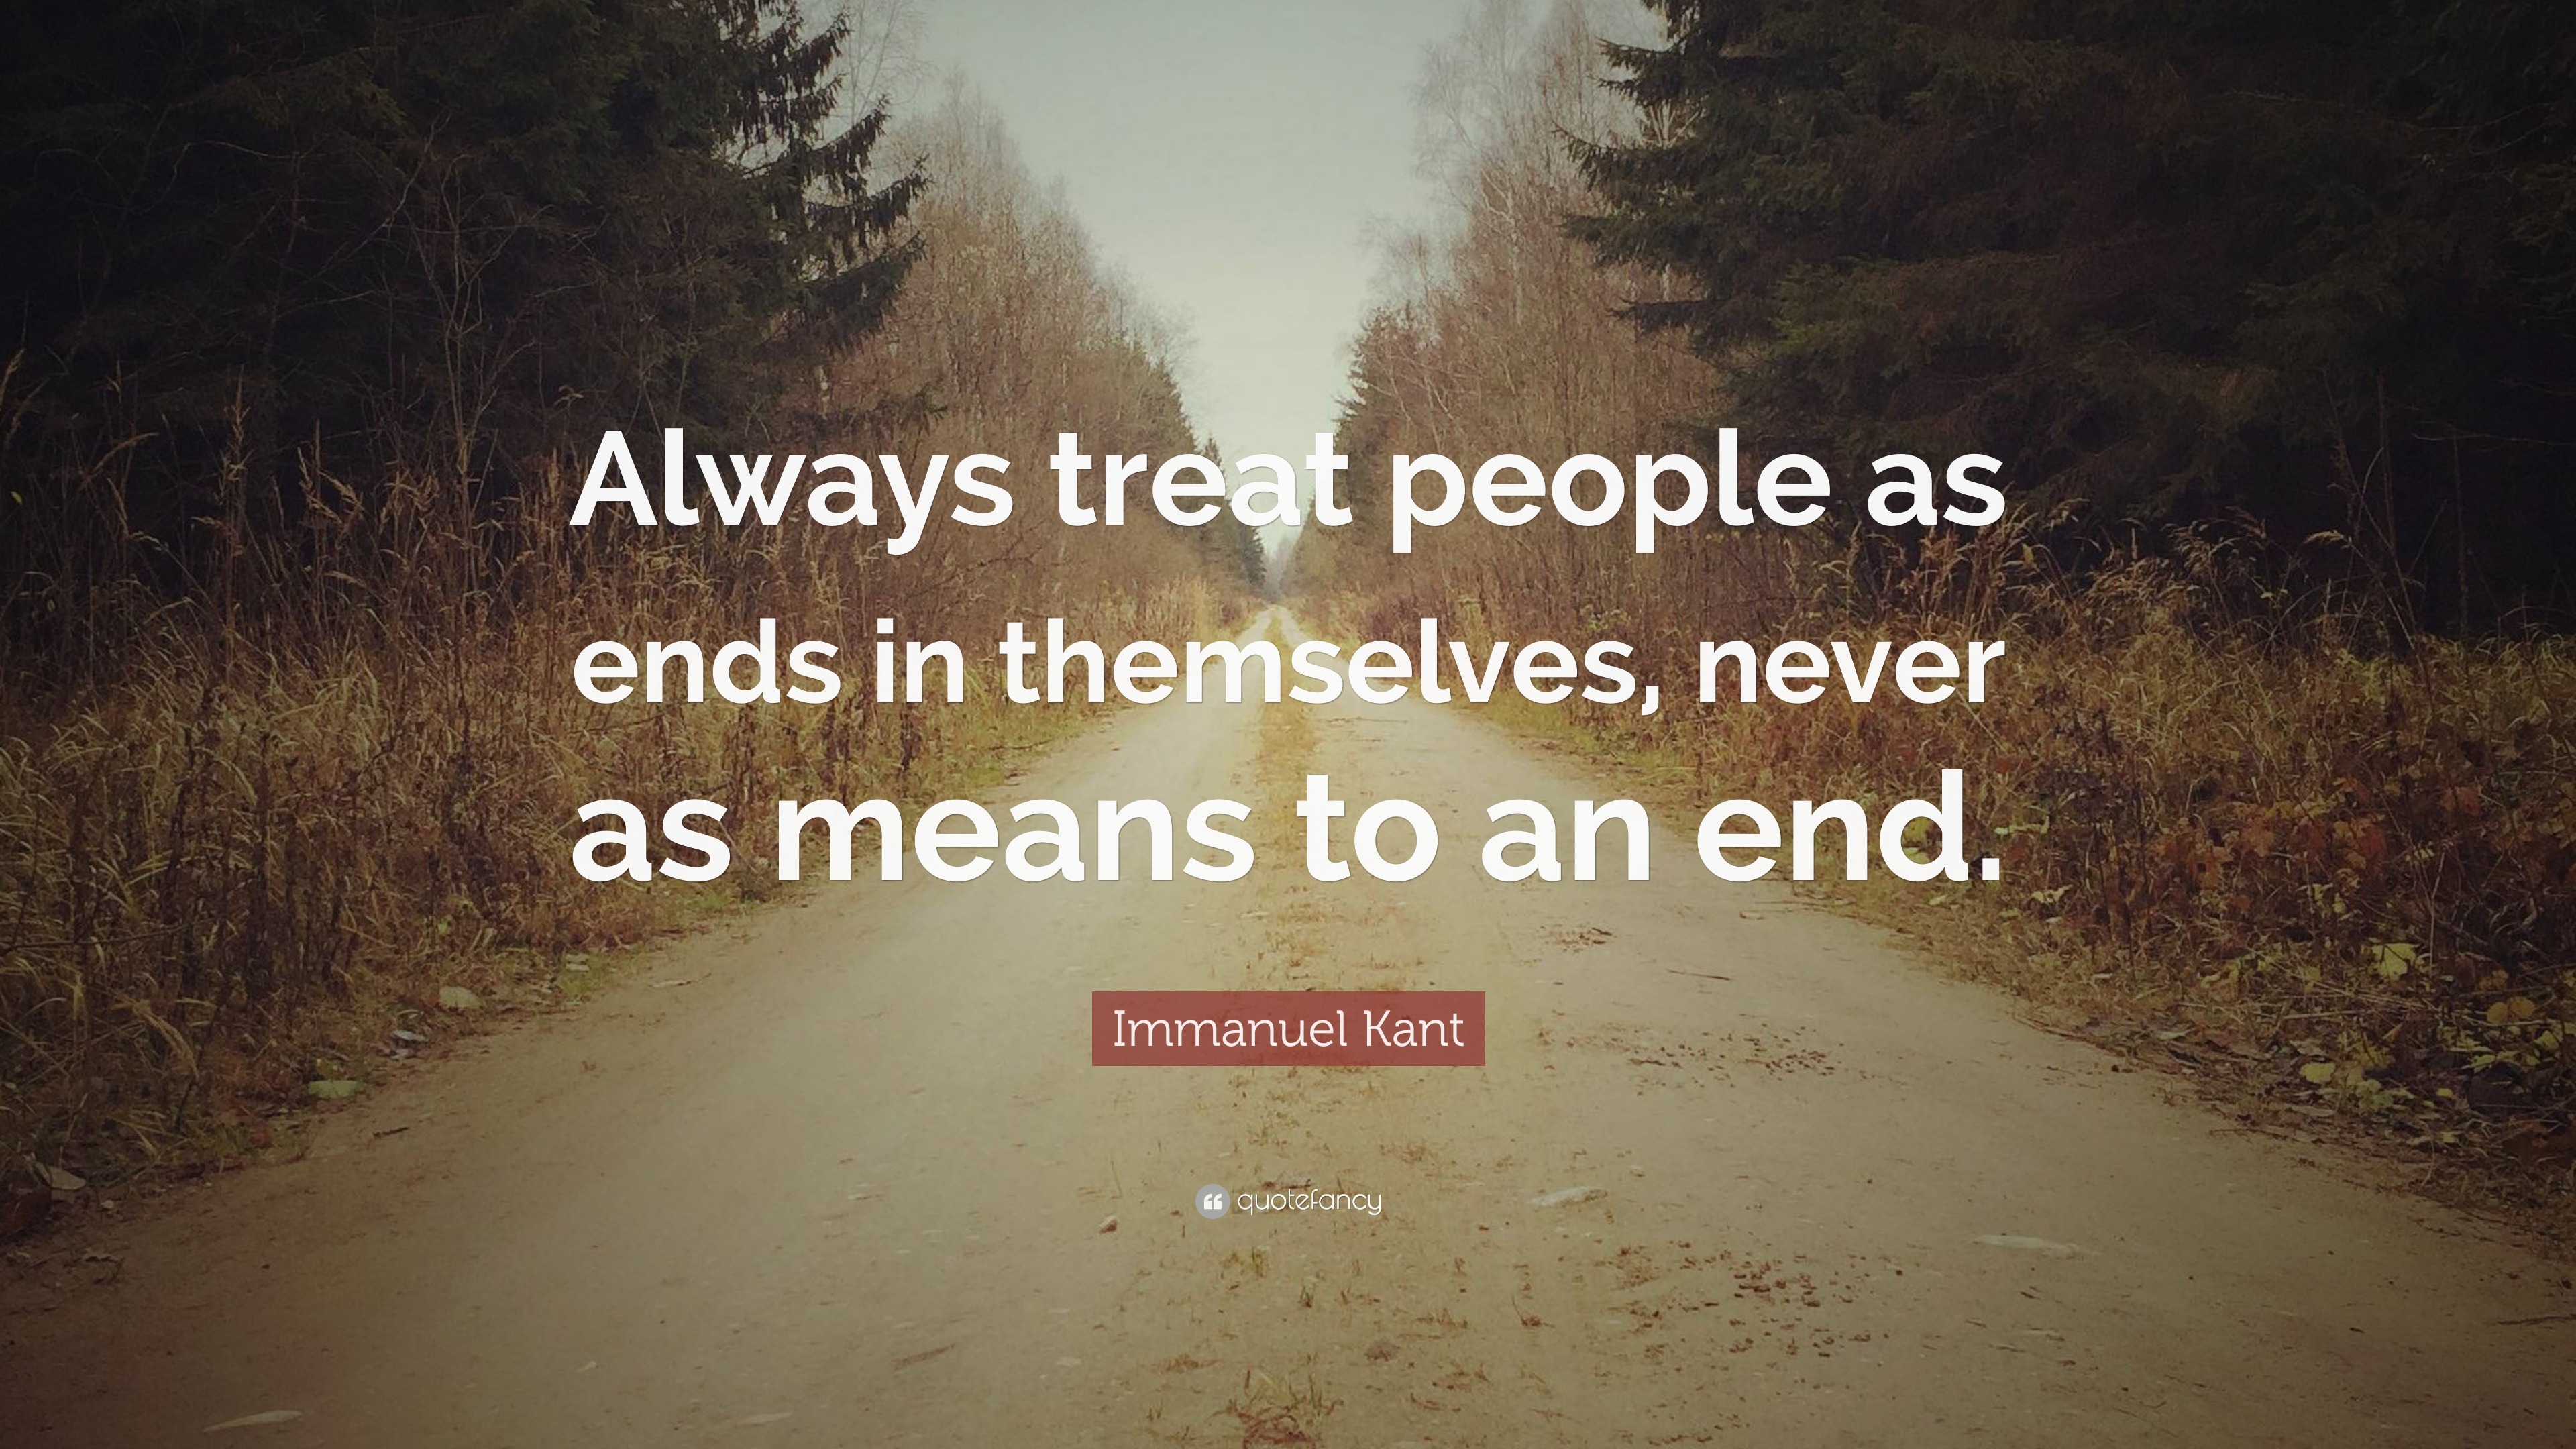 Immanuel Kant Quote: “Always treat people as ends in themselves, never